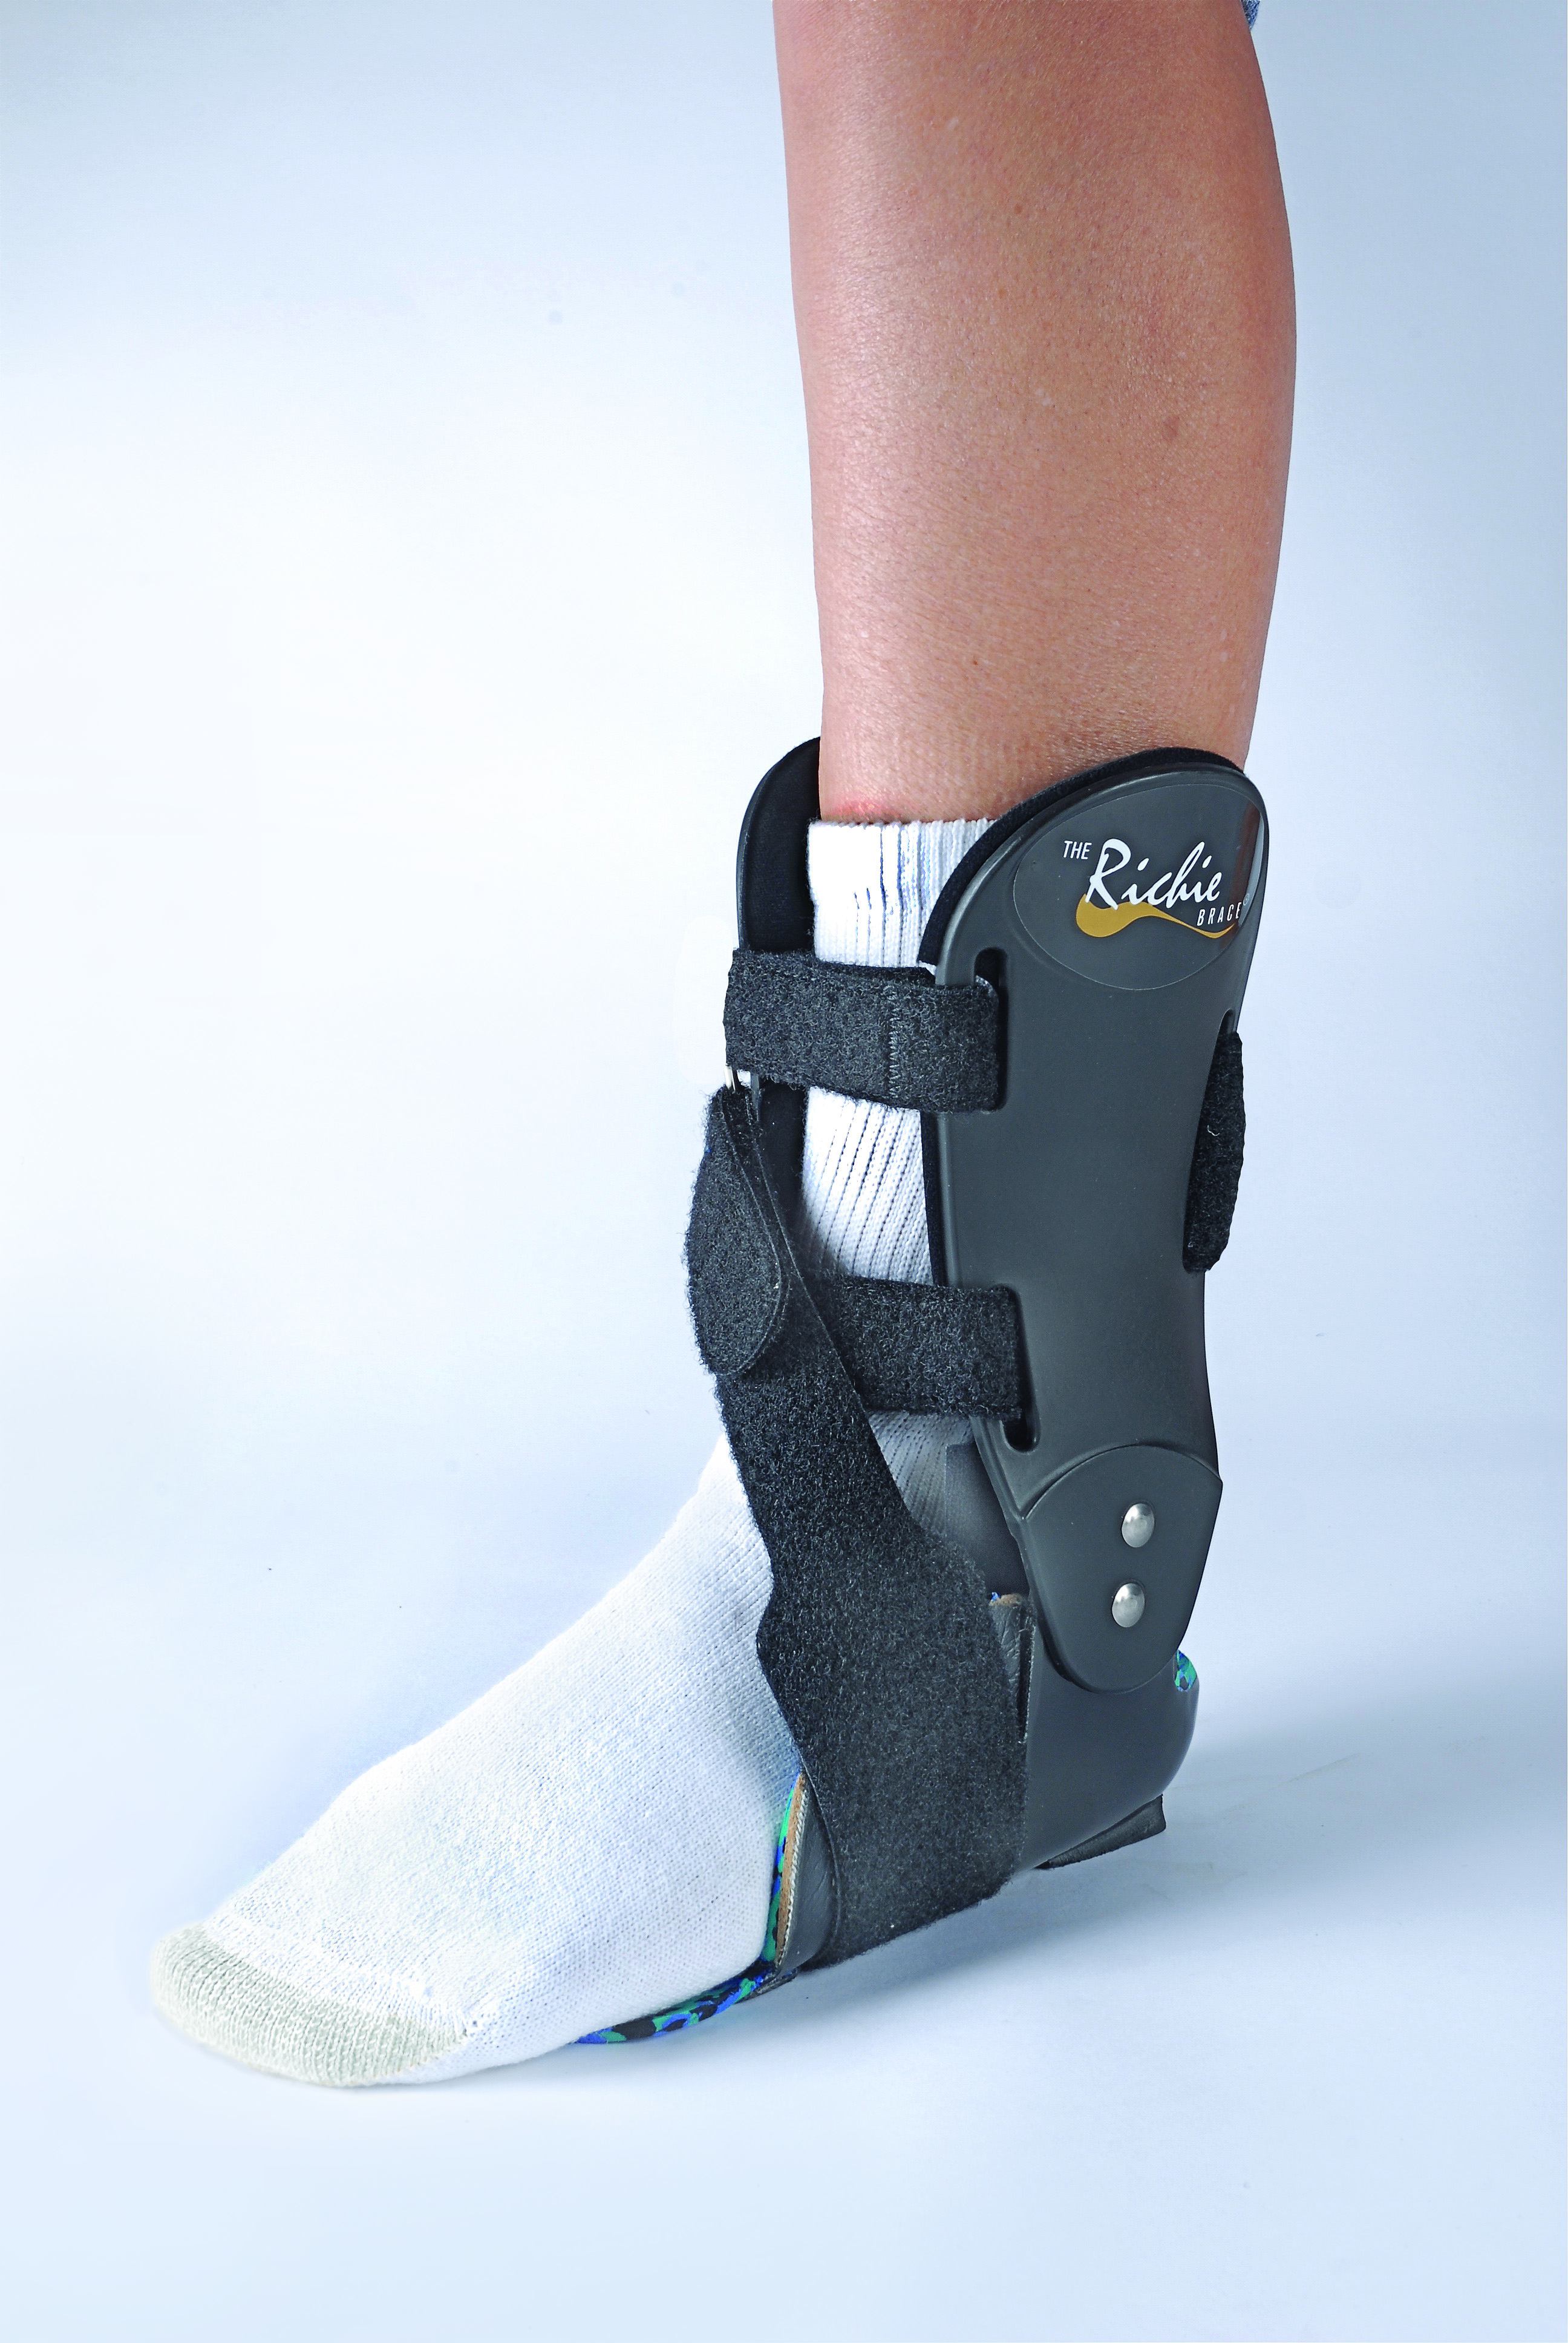 Ankle Supports and Braces